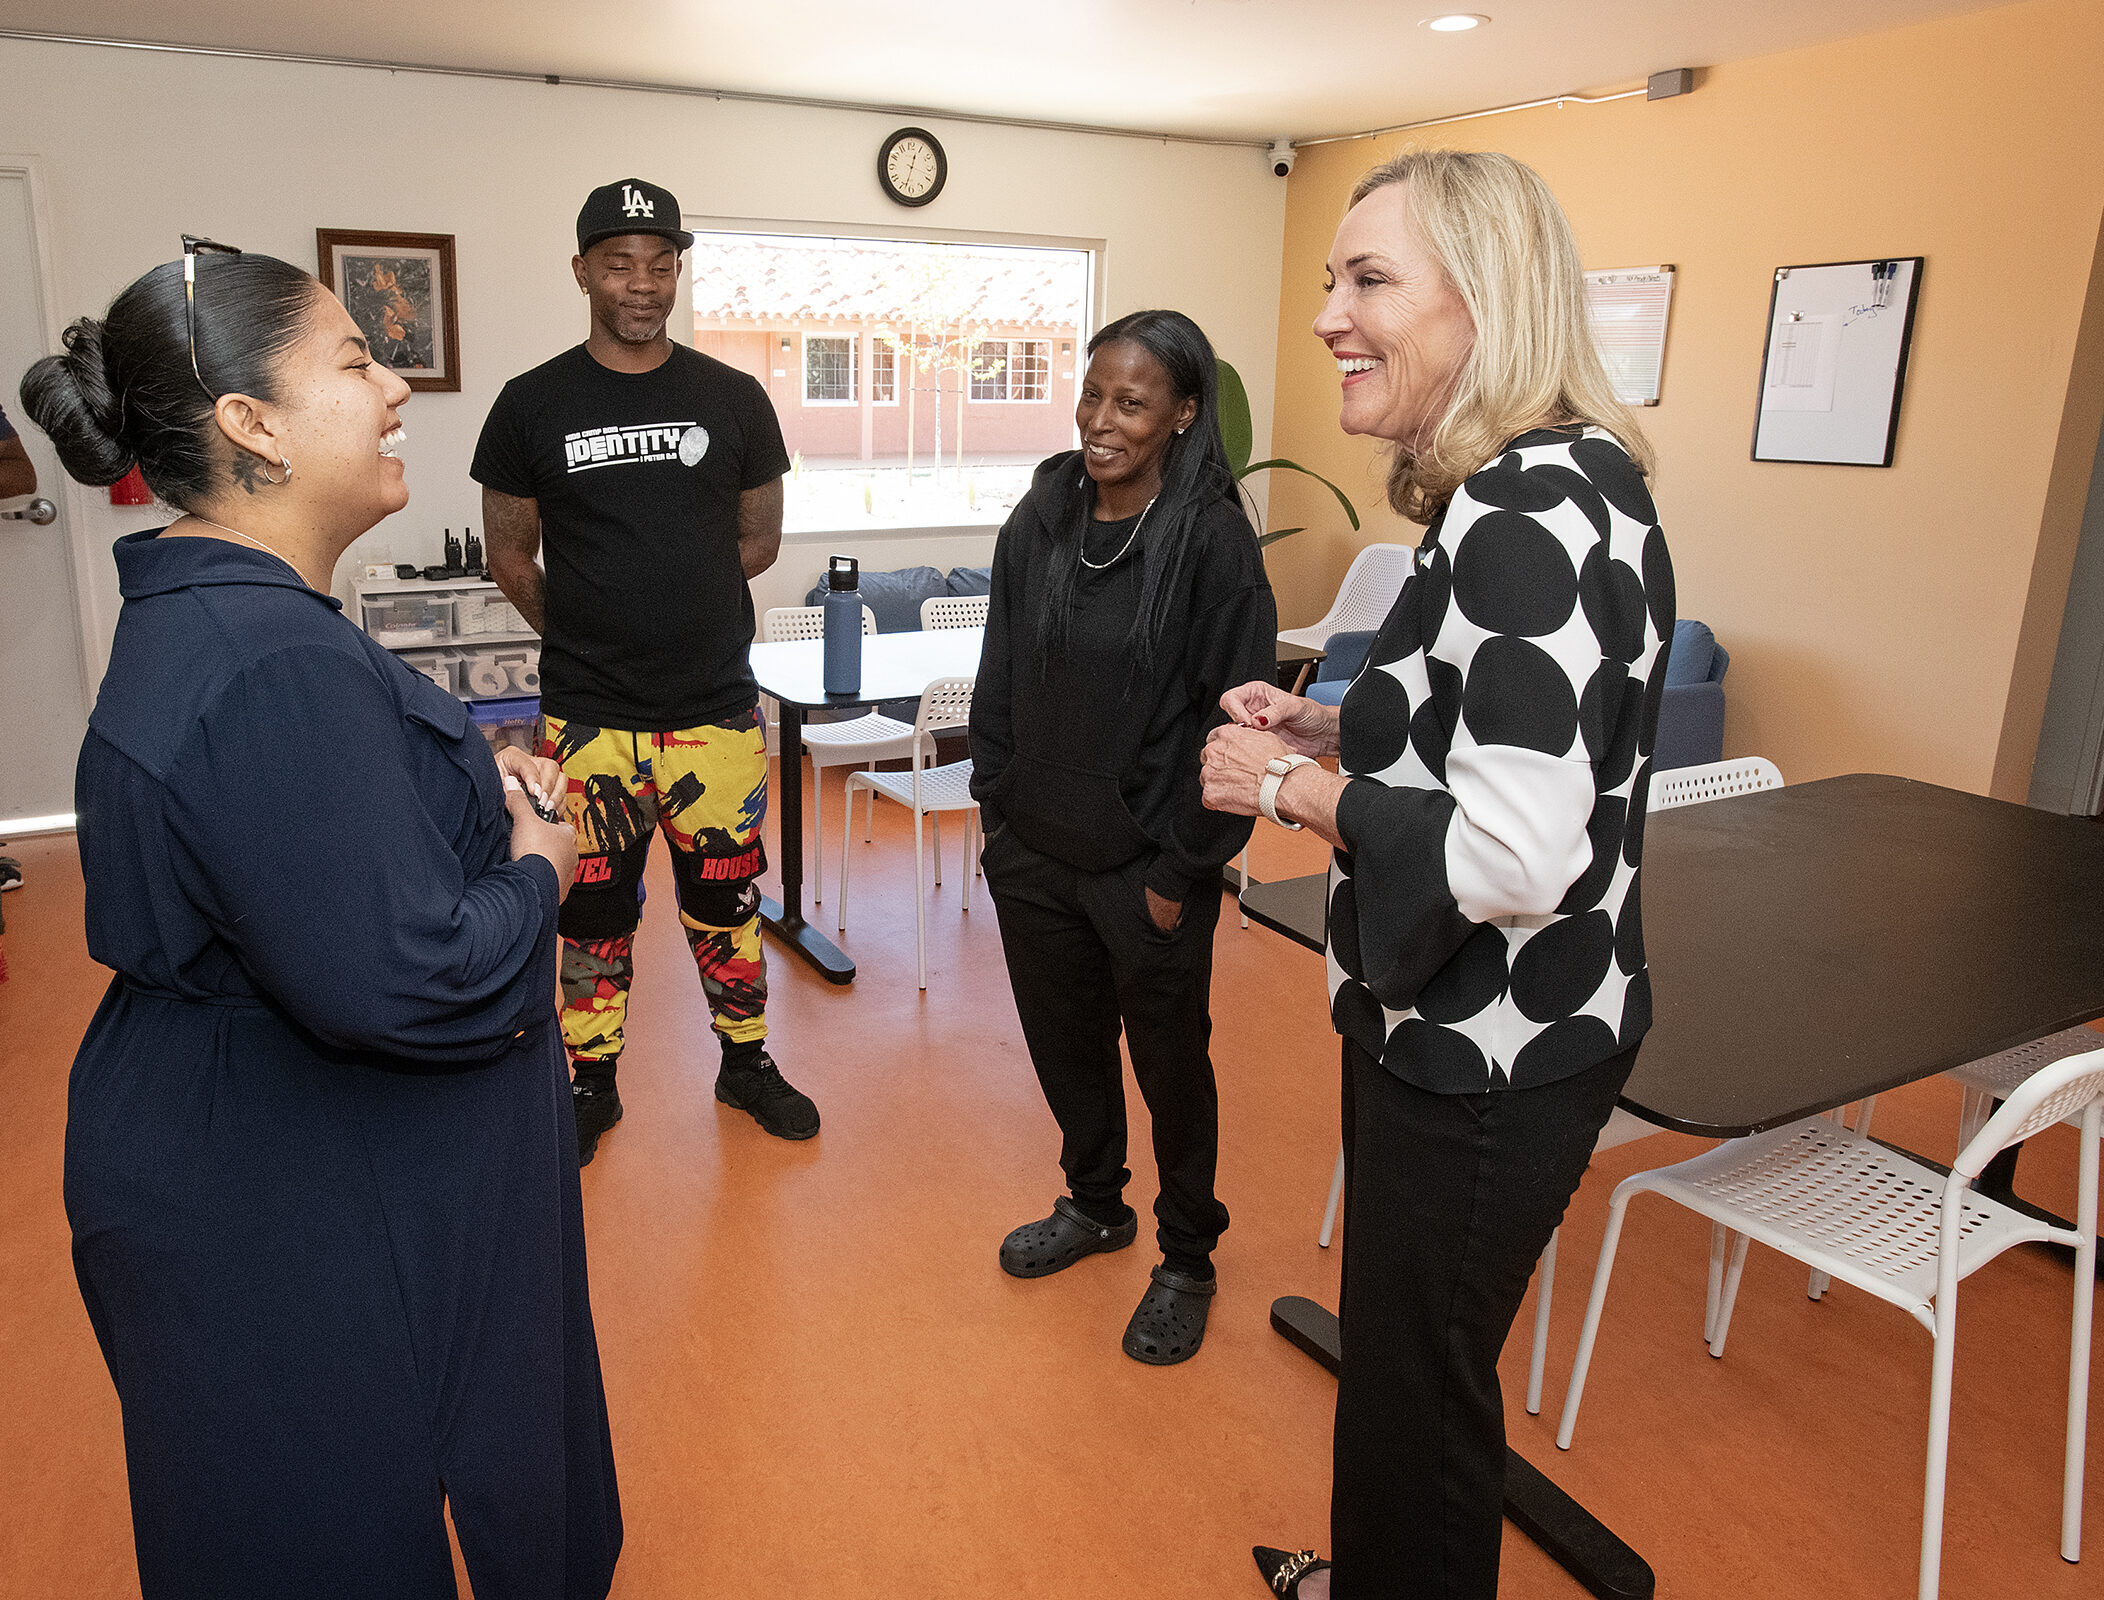 Supervisor Kathryn Barger (far right) pays a visit to The Sierra's and brings welcome home packages to its new residents, including Daniel and Shanika. She is greeted by Hope of the Valley program manager, Melissa Amezcua (far right). Photo by Diandra Jay/Los Angeles County.